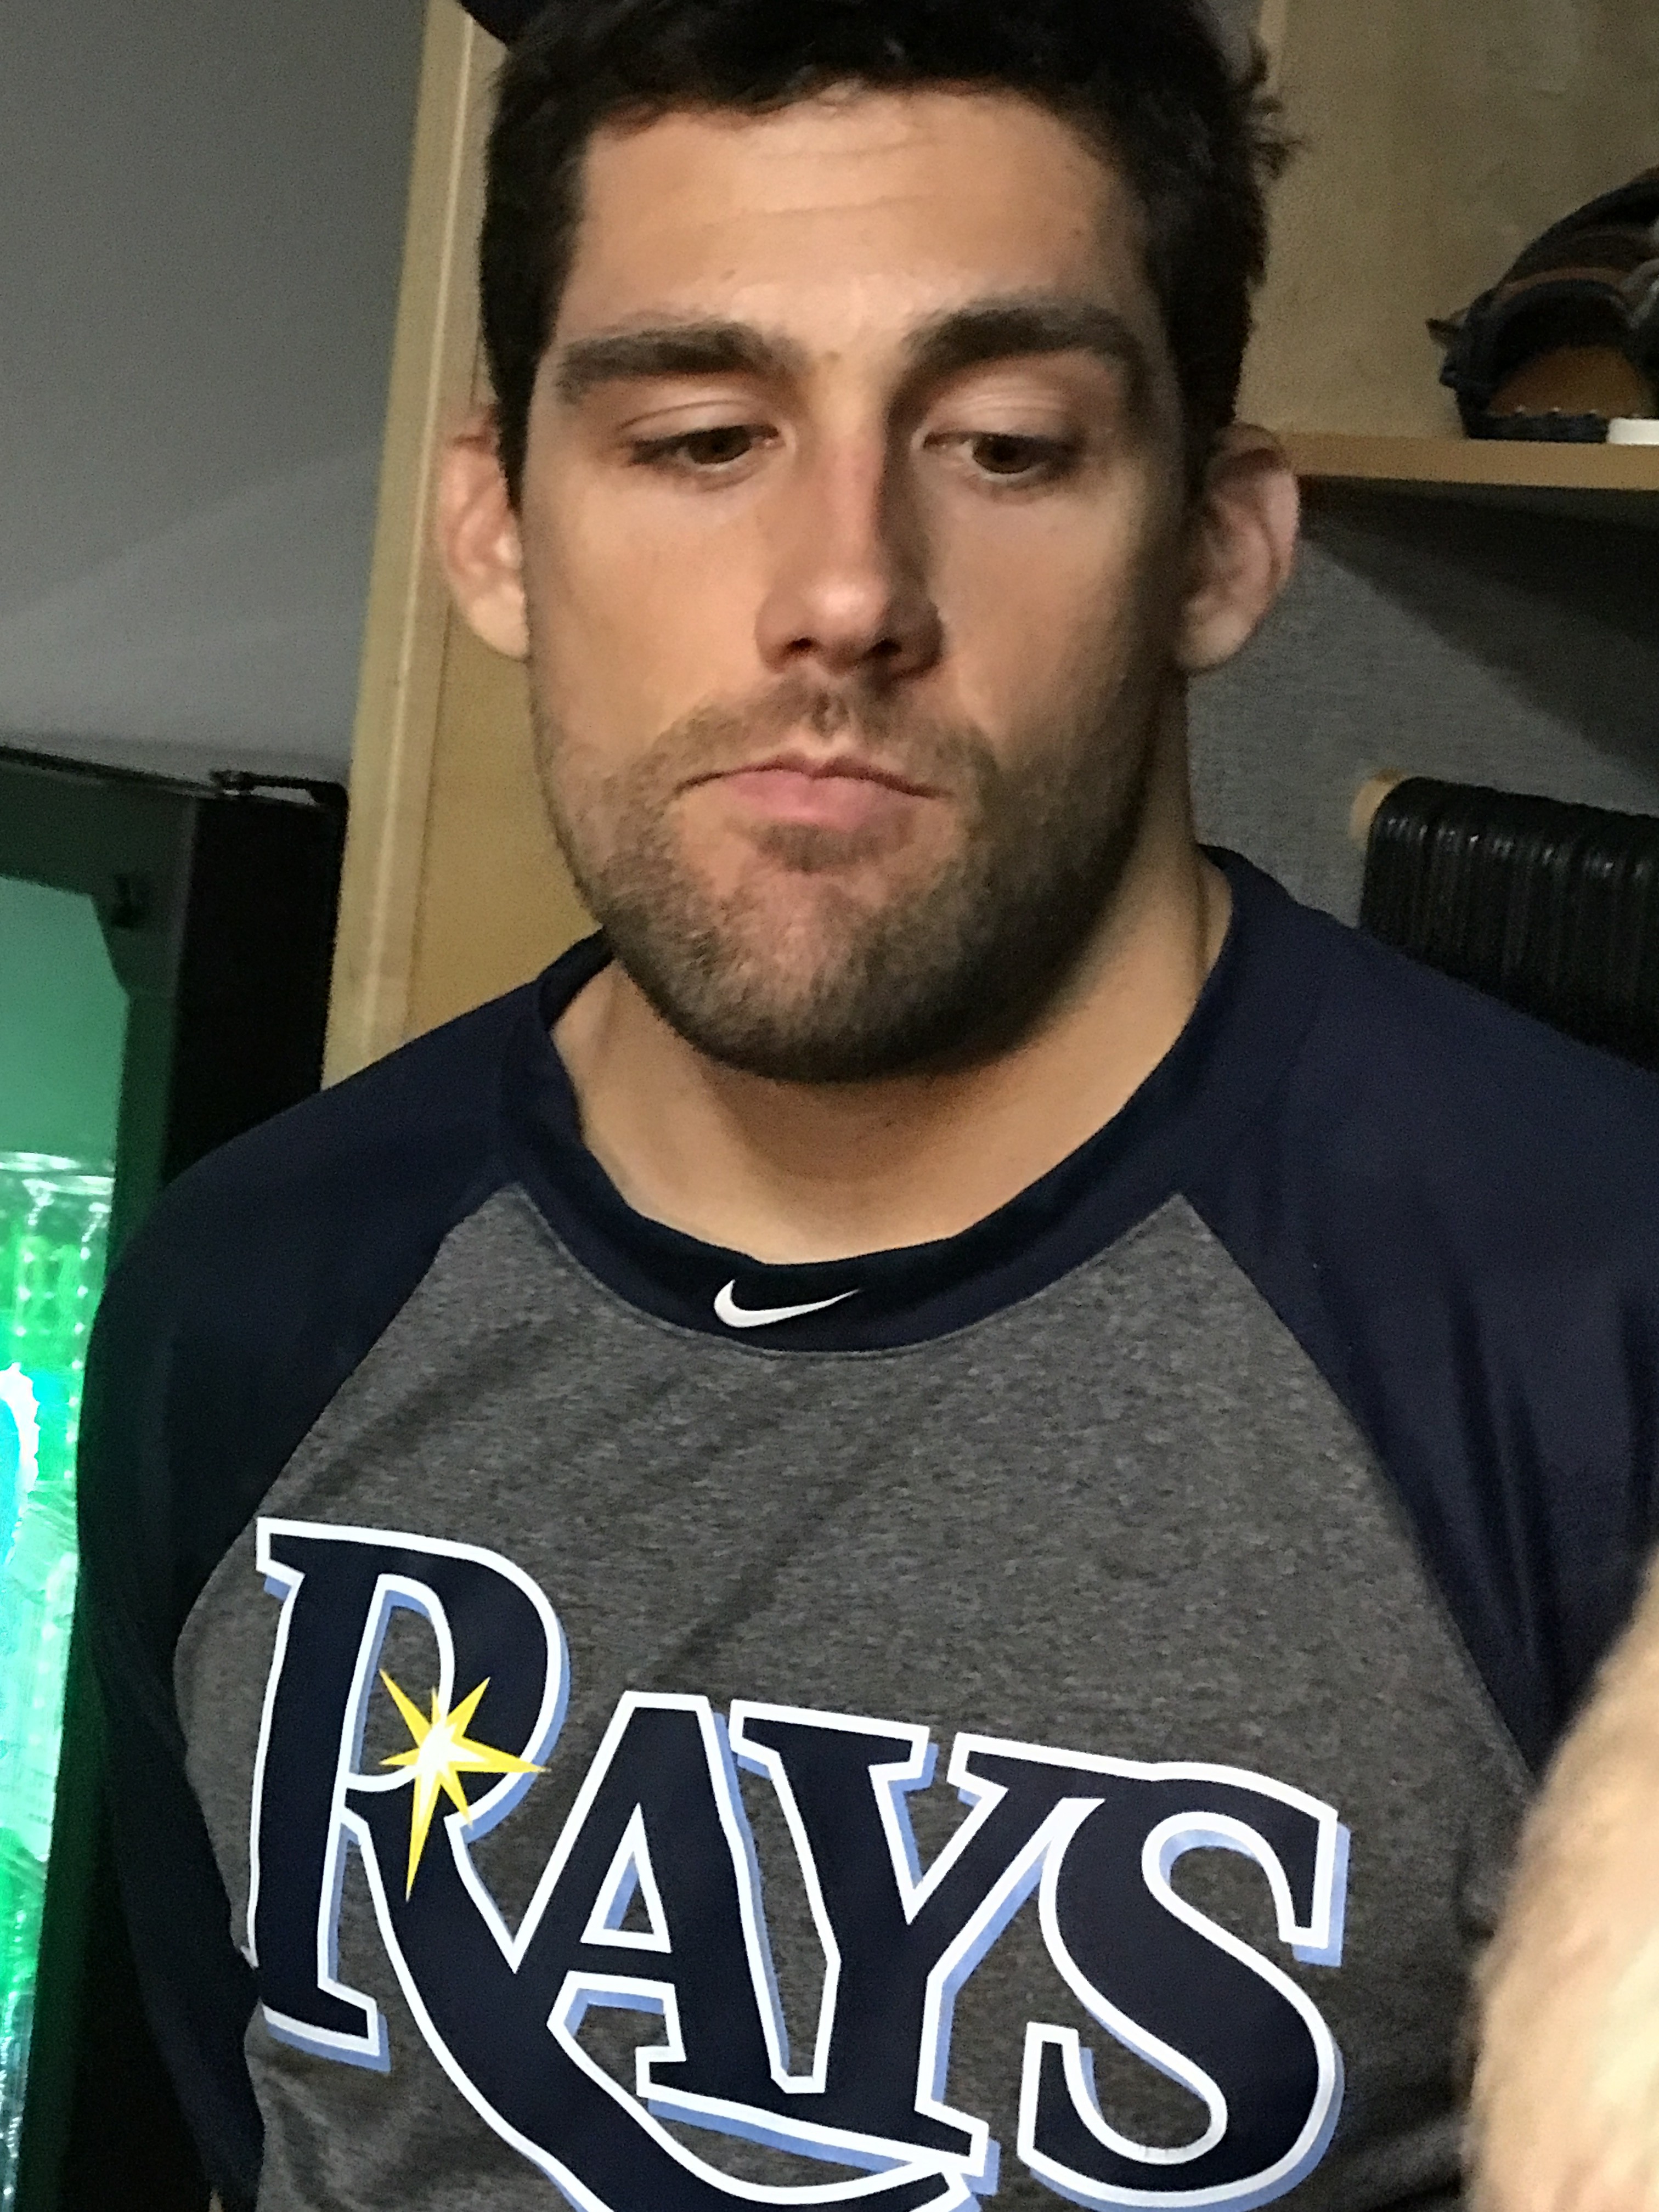 Should the Rays trade Eovaldi?